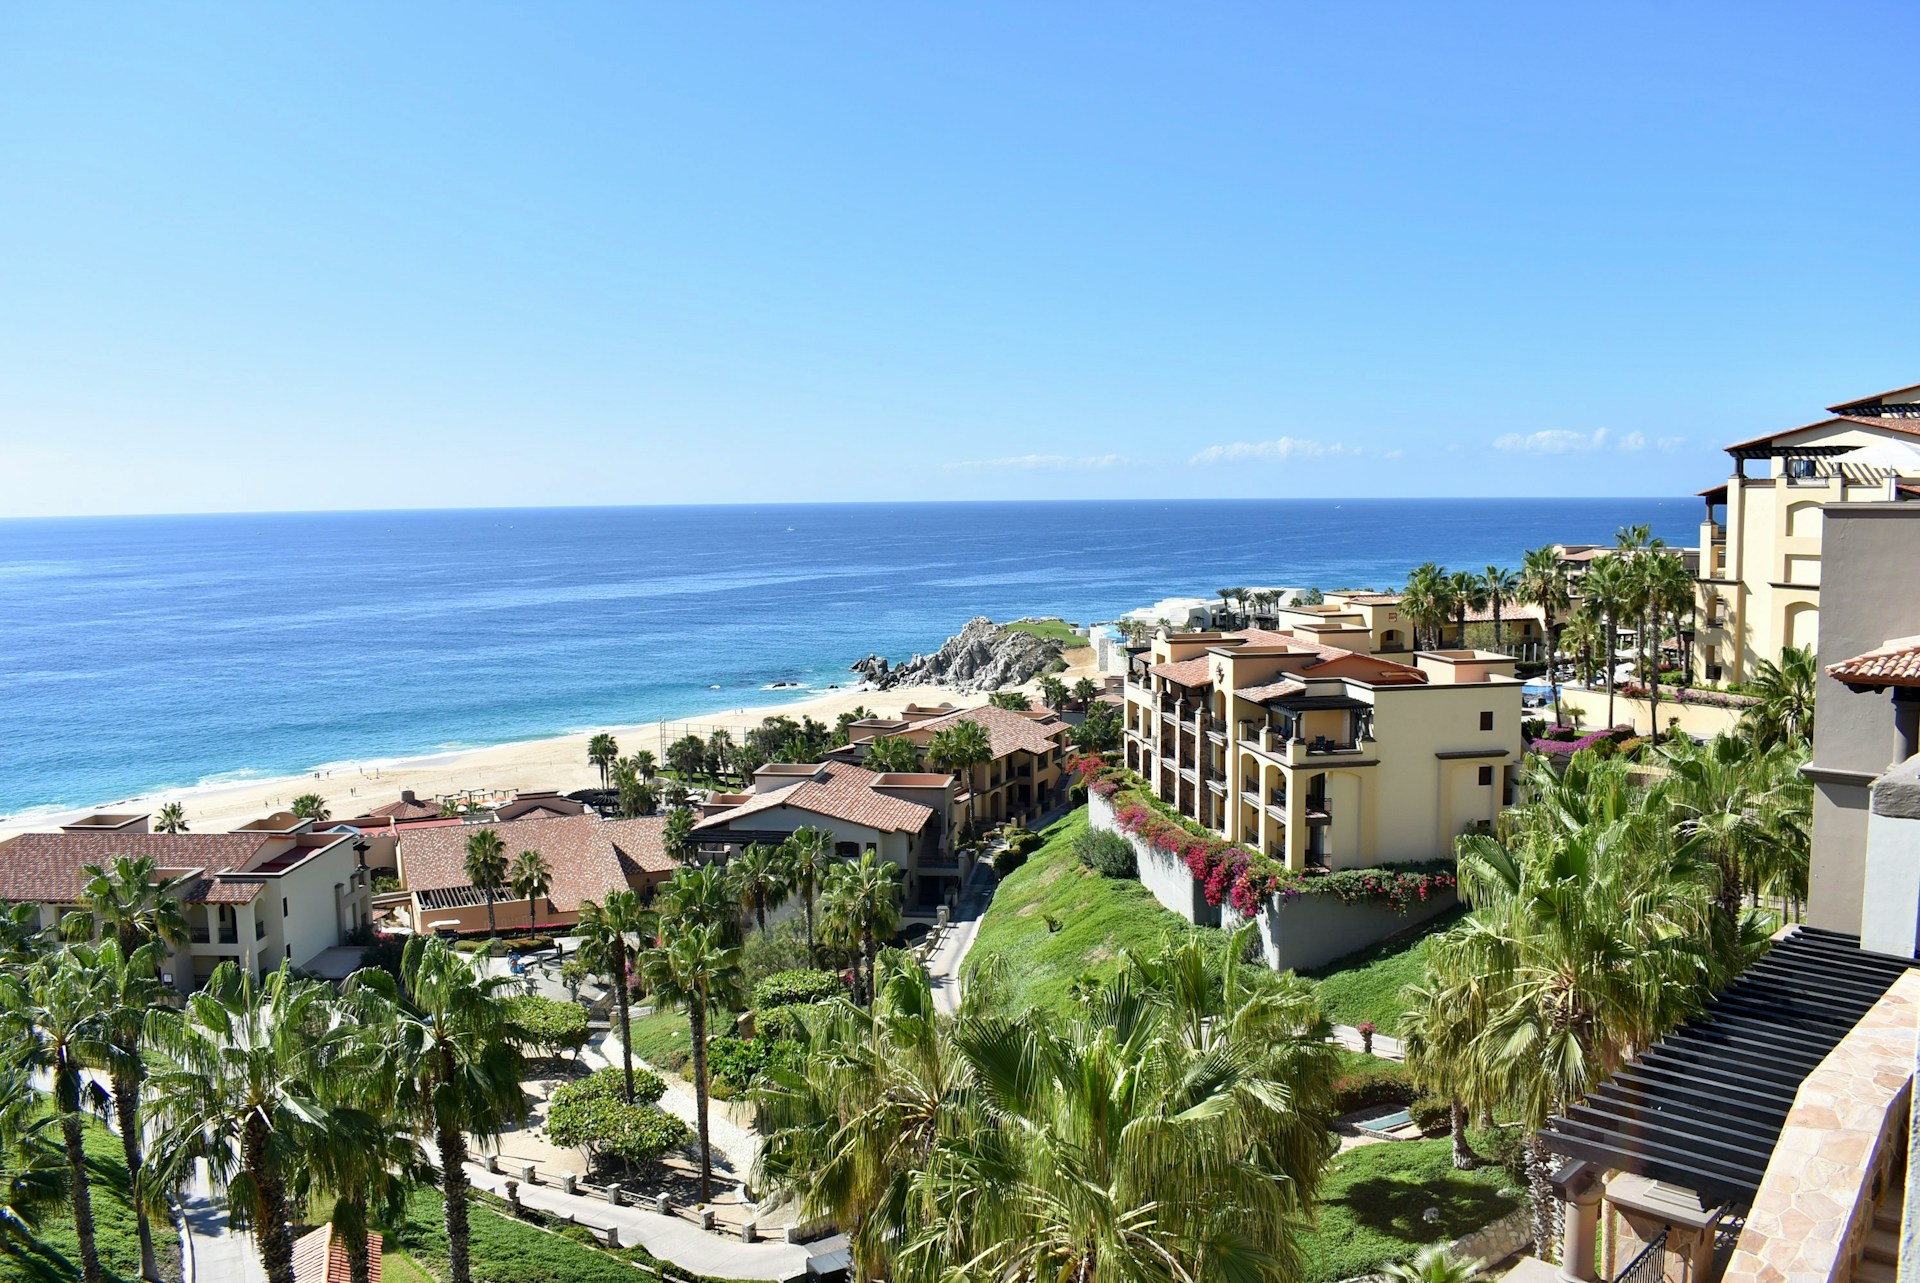 An ocean view of some of the best honeymoon resorts in Cabo.